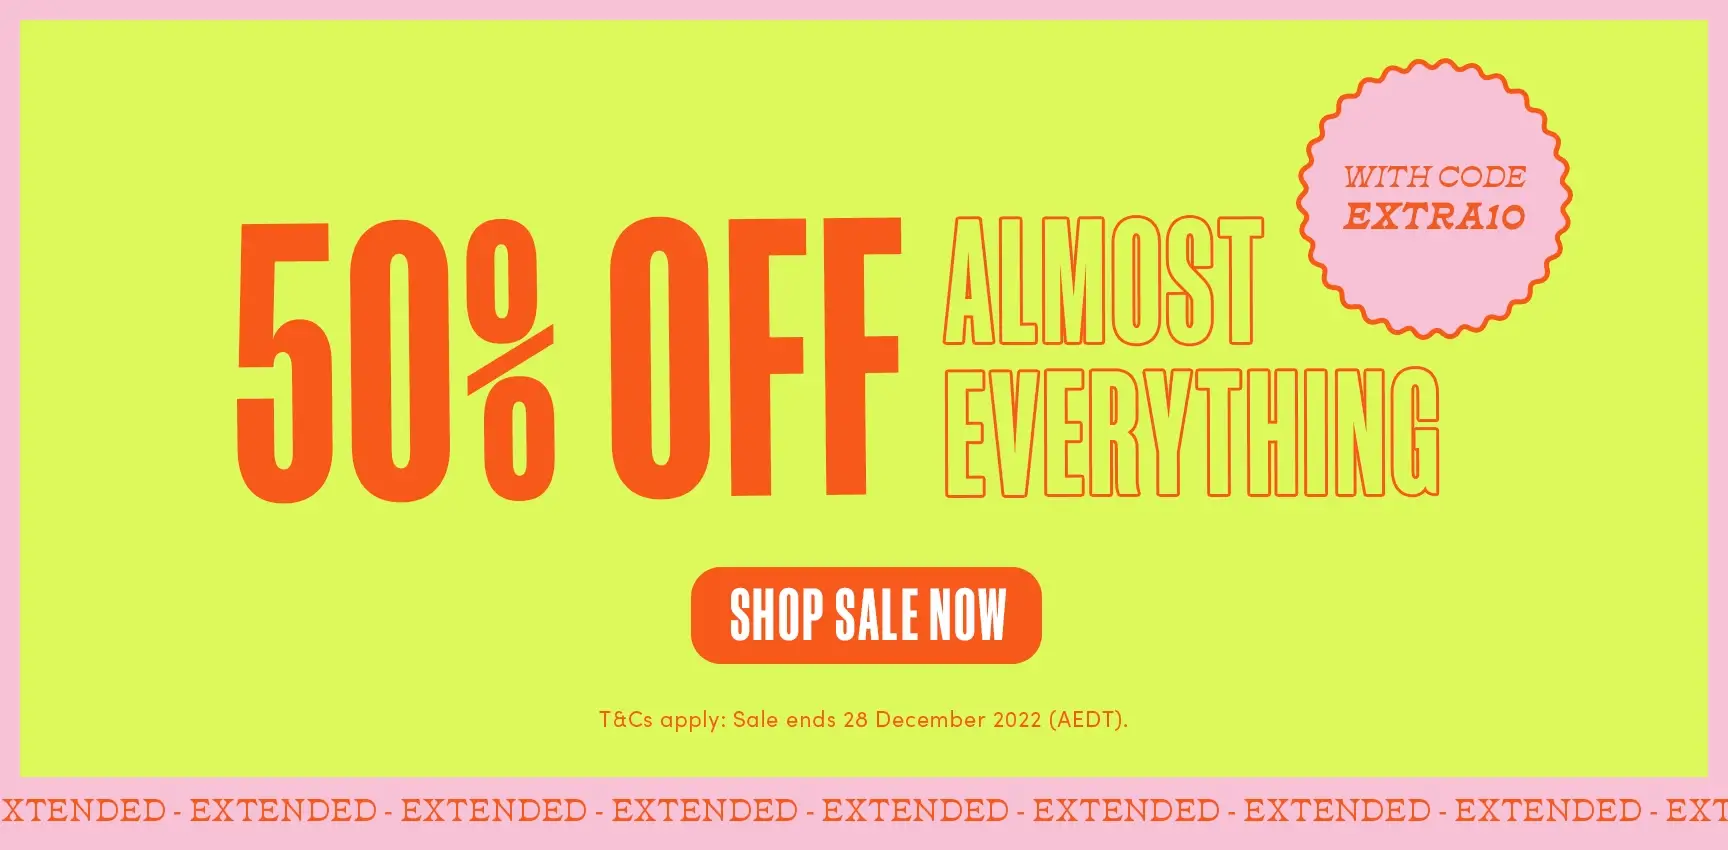 Kip&Co Boxing Day sale - 50% OFF almost everything with promo code